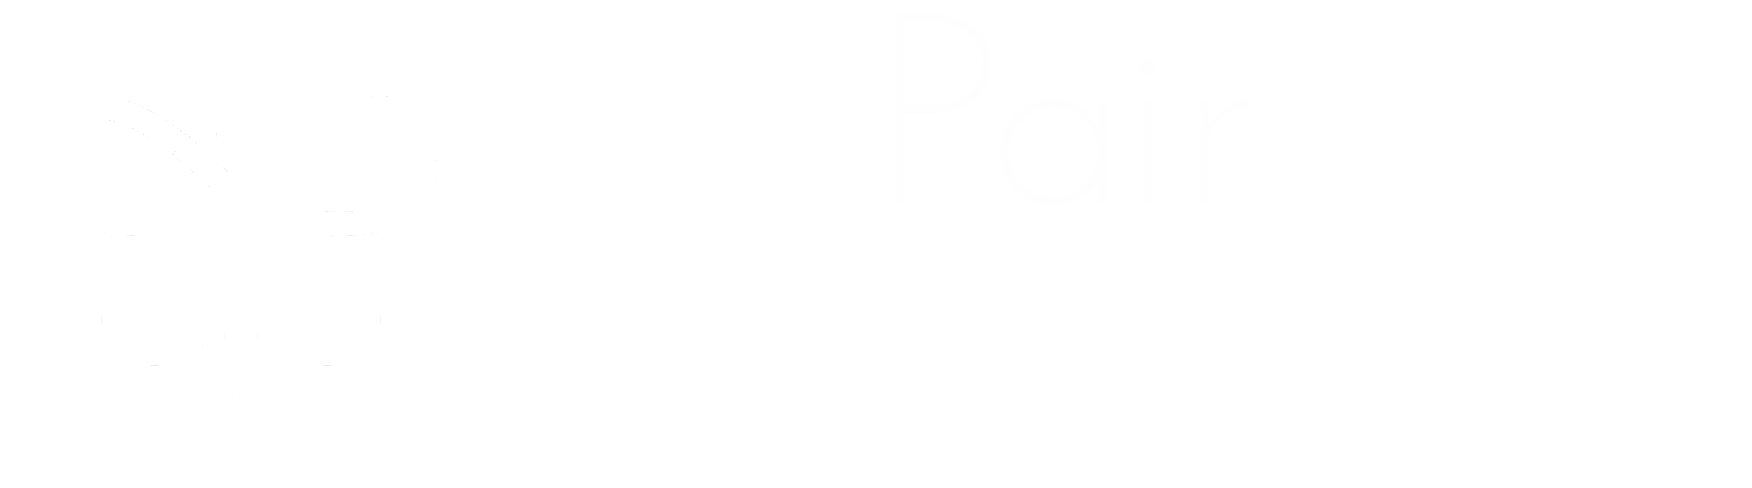 Au pair butterfly